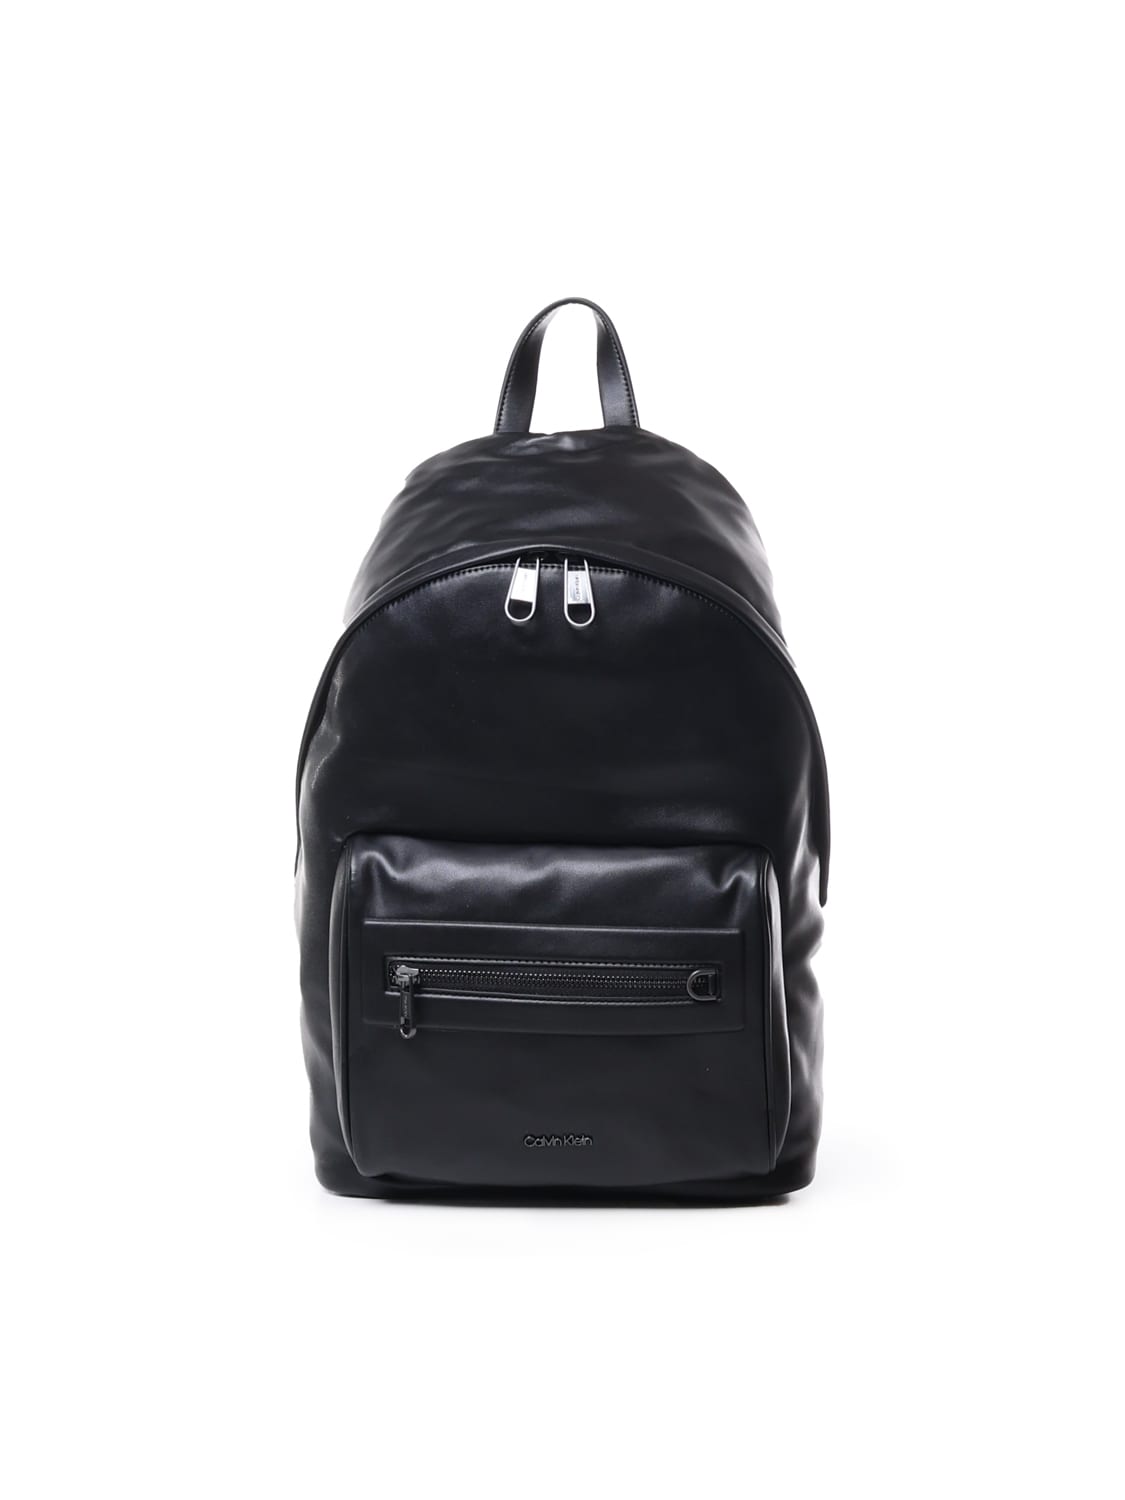 CALVIN KLEIN FAUX LEATHER BACKPACK